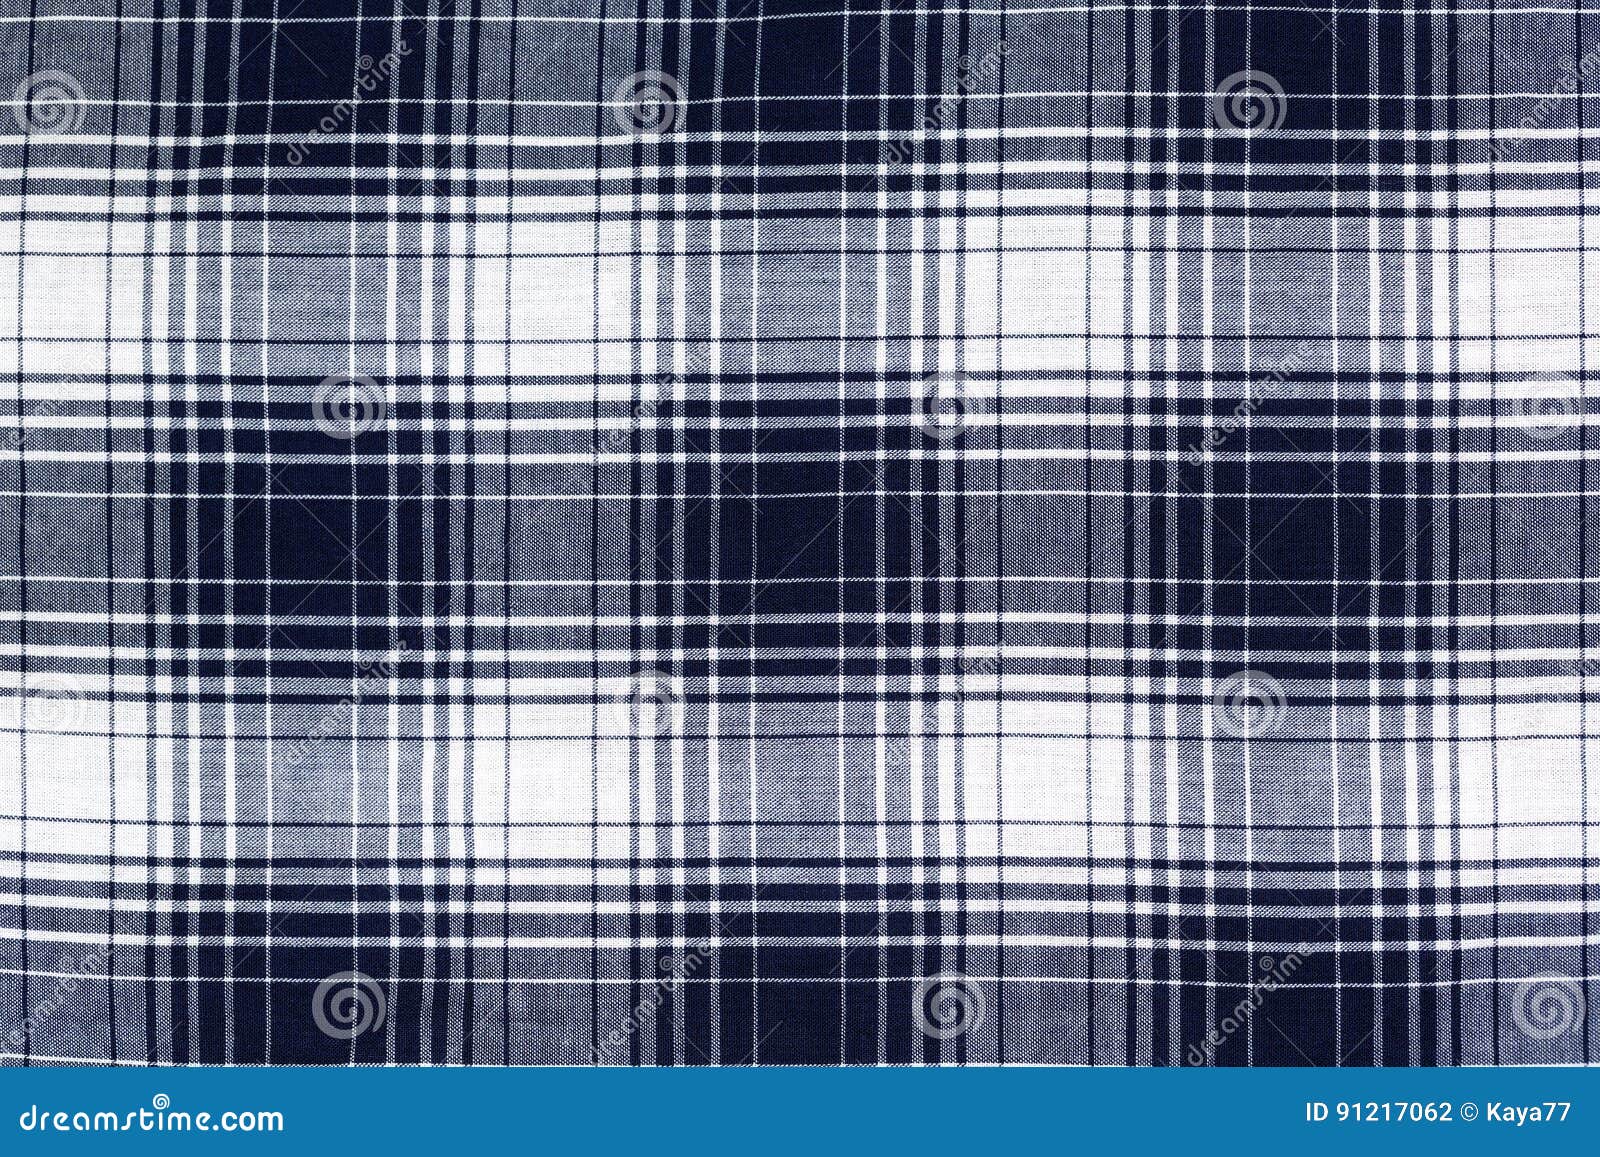 Blue checkered background stock photo. Image of linen - 91217062